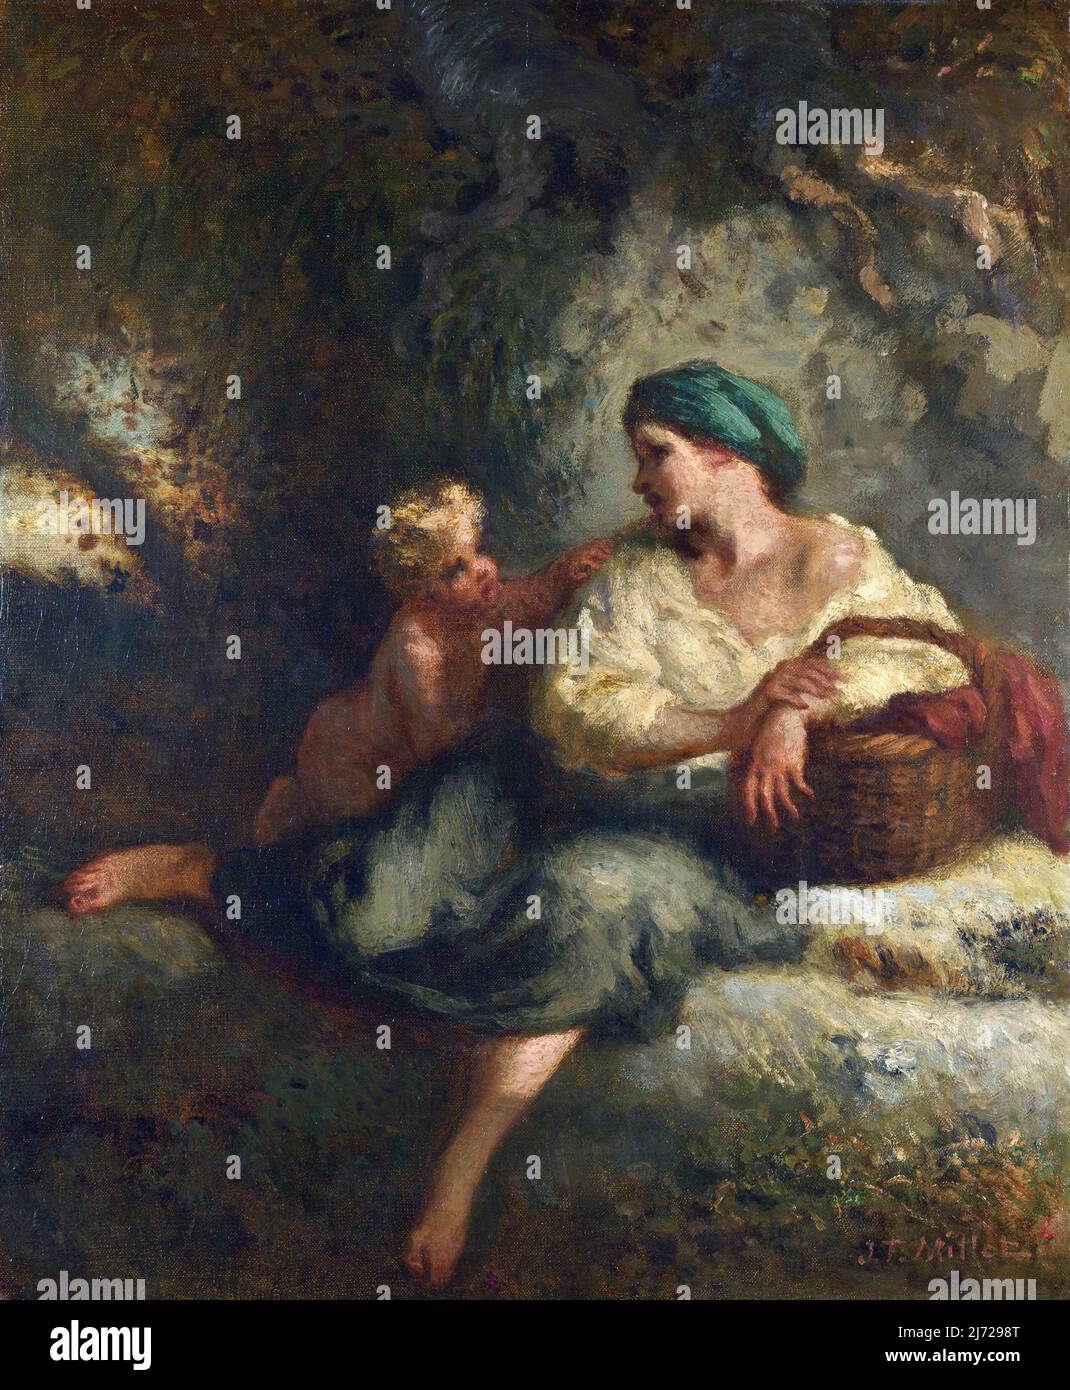 Woman and Child in a Landscape by Jean-Francois Millet (1814-1875), oil on canvas, c. 1846-7 Stock Photo